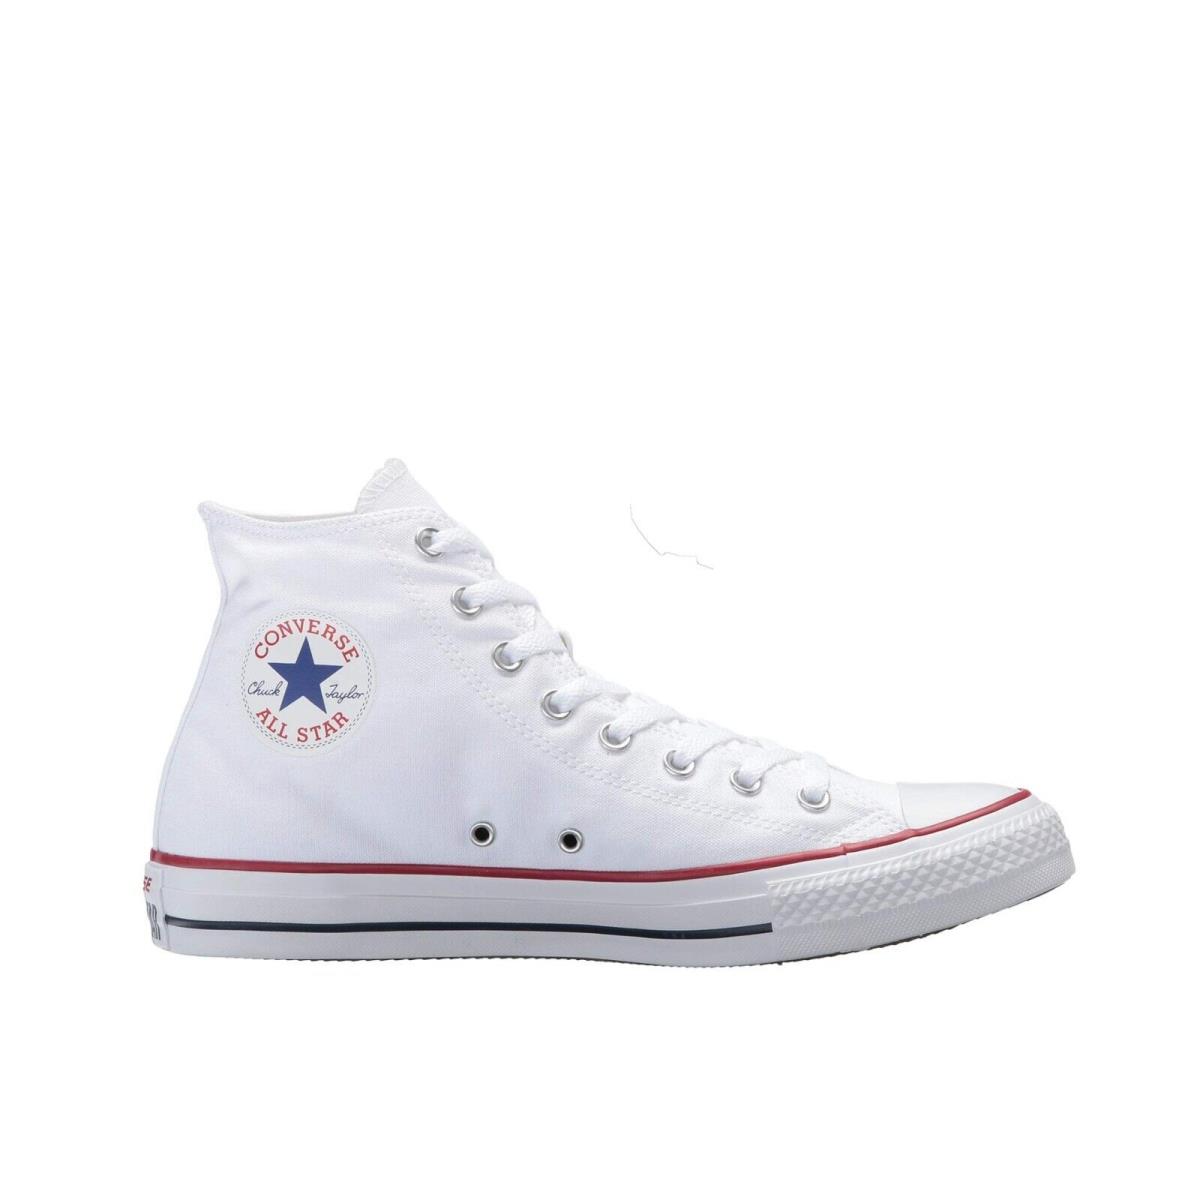 Converse Chuck Taylor All Star High Top Unisex Canvas Sneaker Classic Shoes Optical White